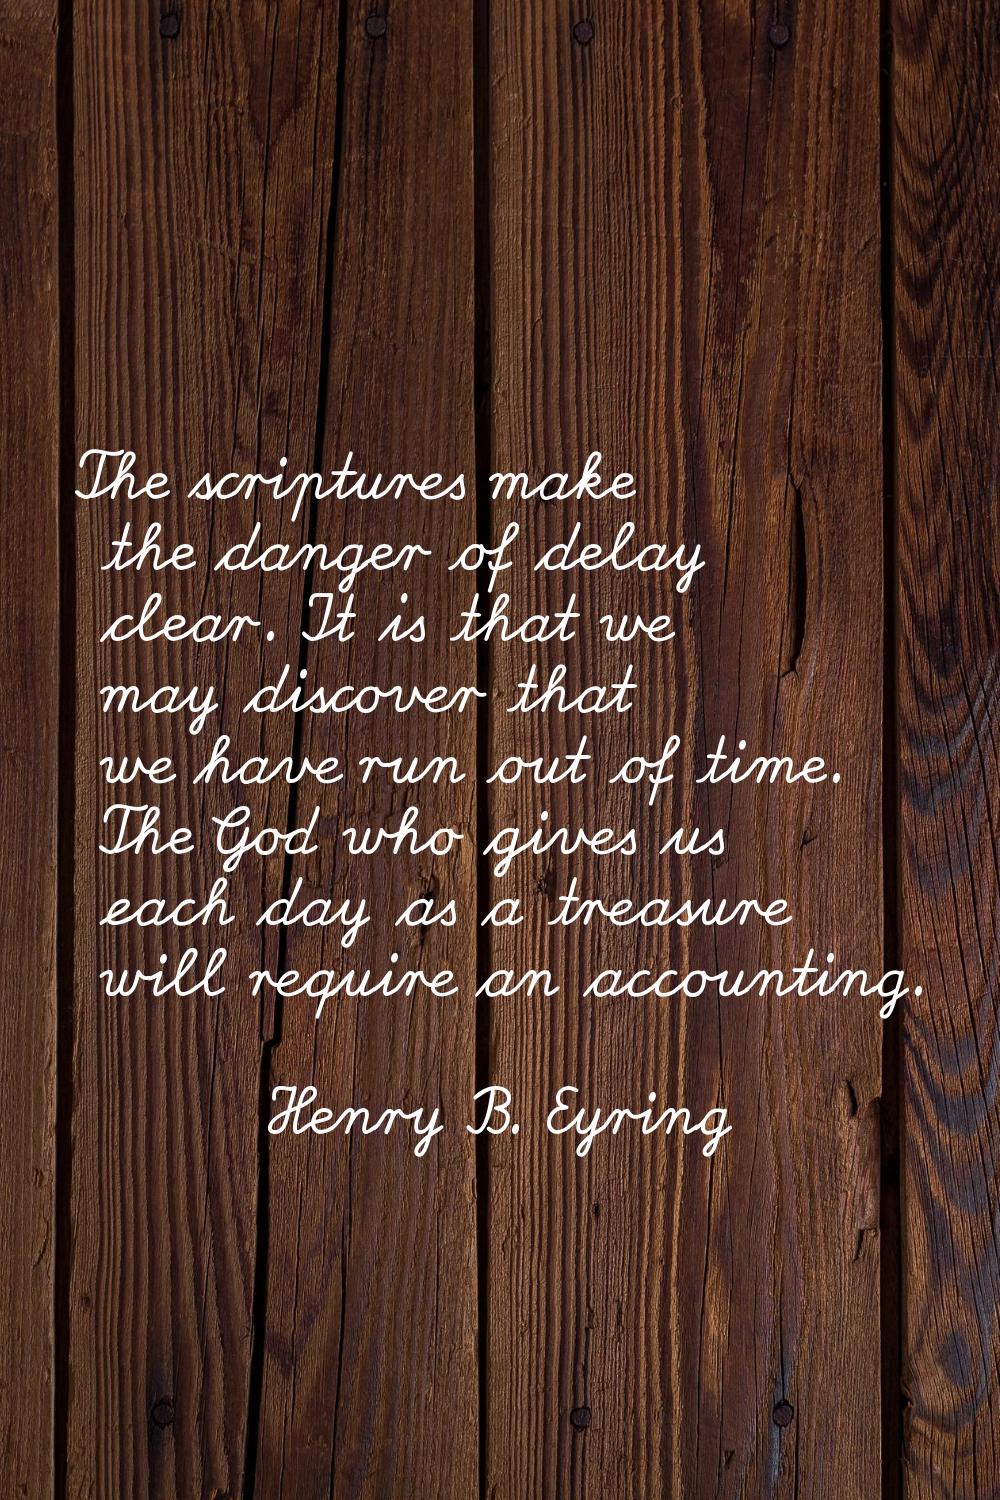 The scriptures make the danger of delay clear. It is that we may discover that we have run out of t